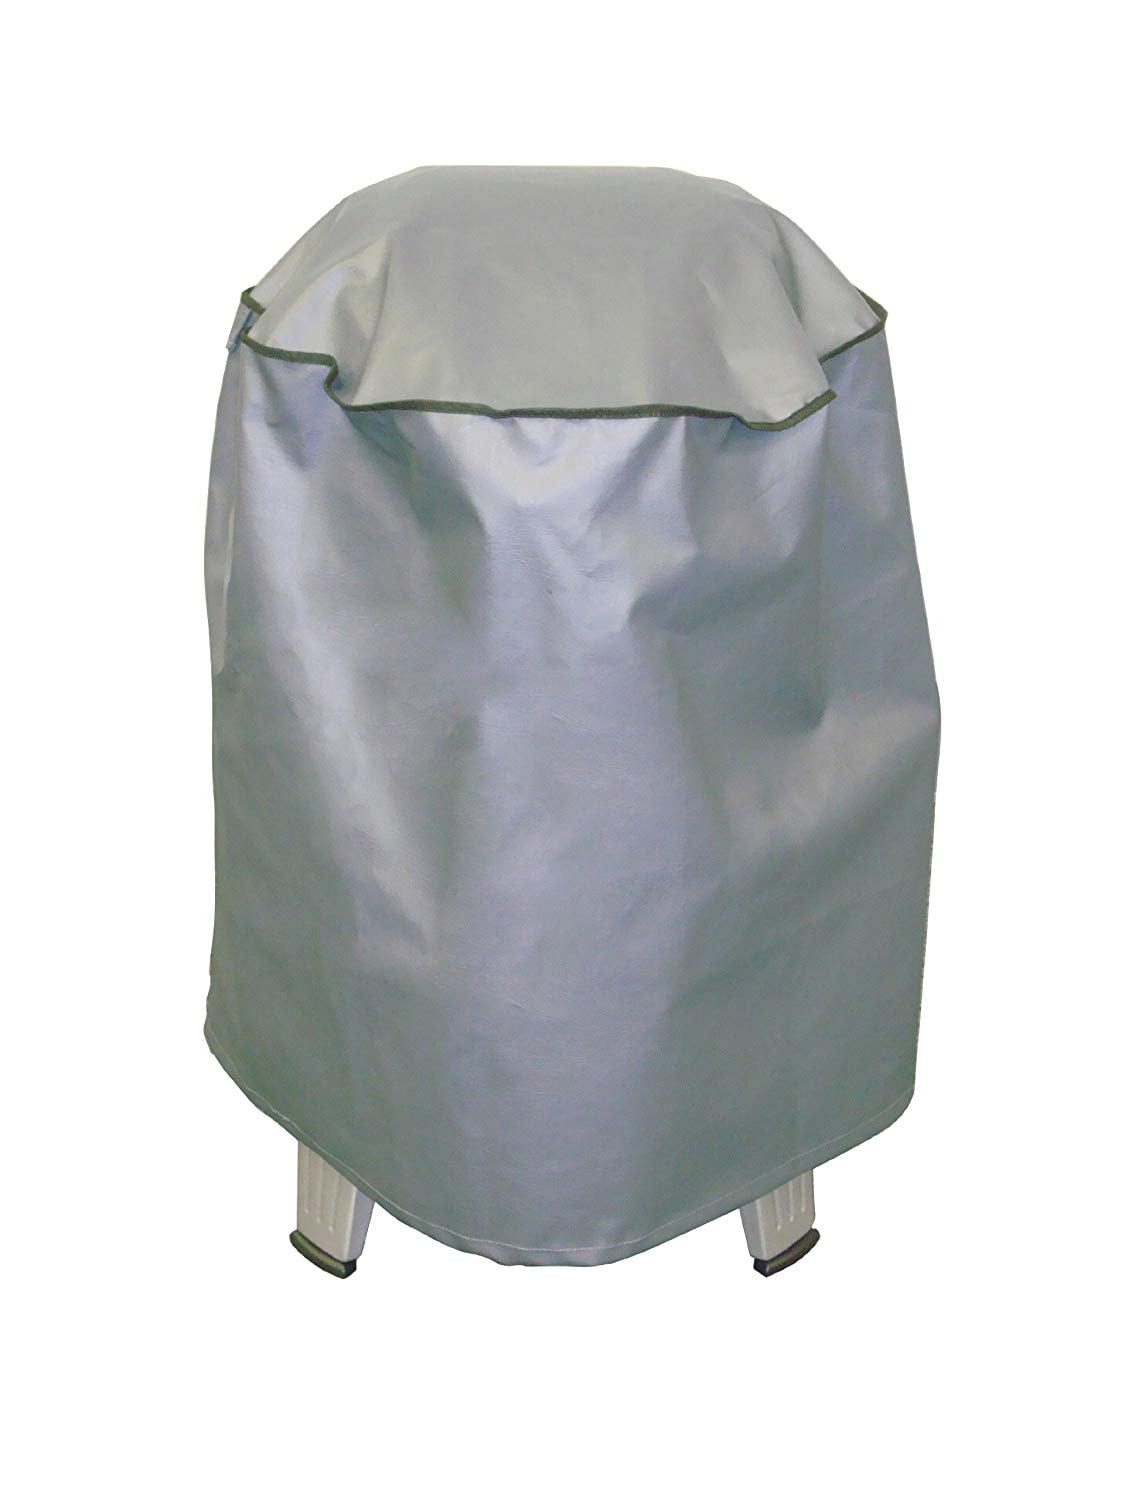 NEW  Char-Broil The Big Easy Smoker Roaster & Grill Cover RARE NAVY COLOR 